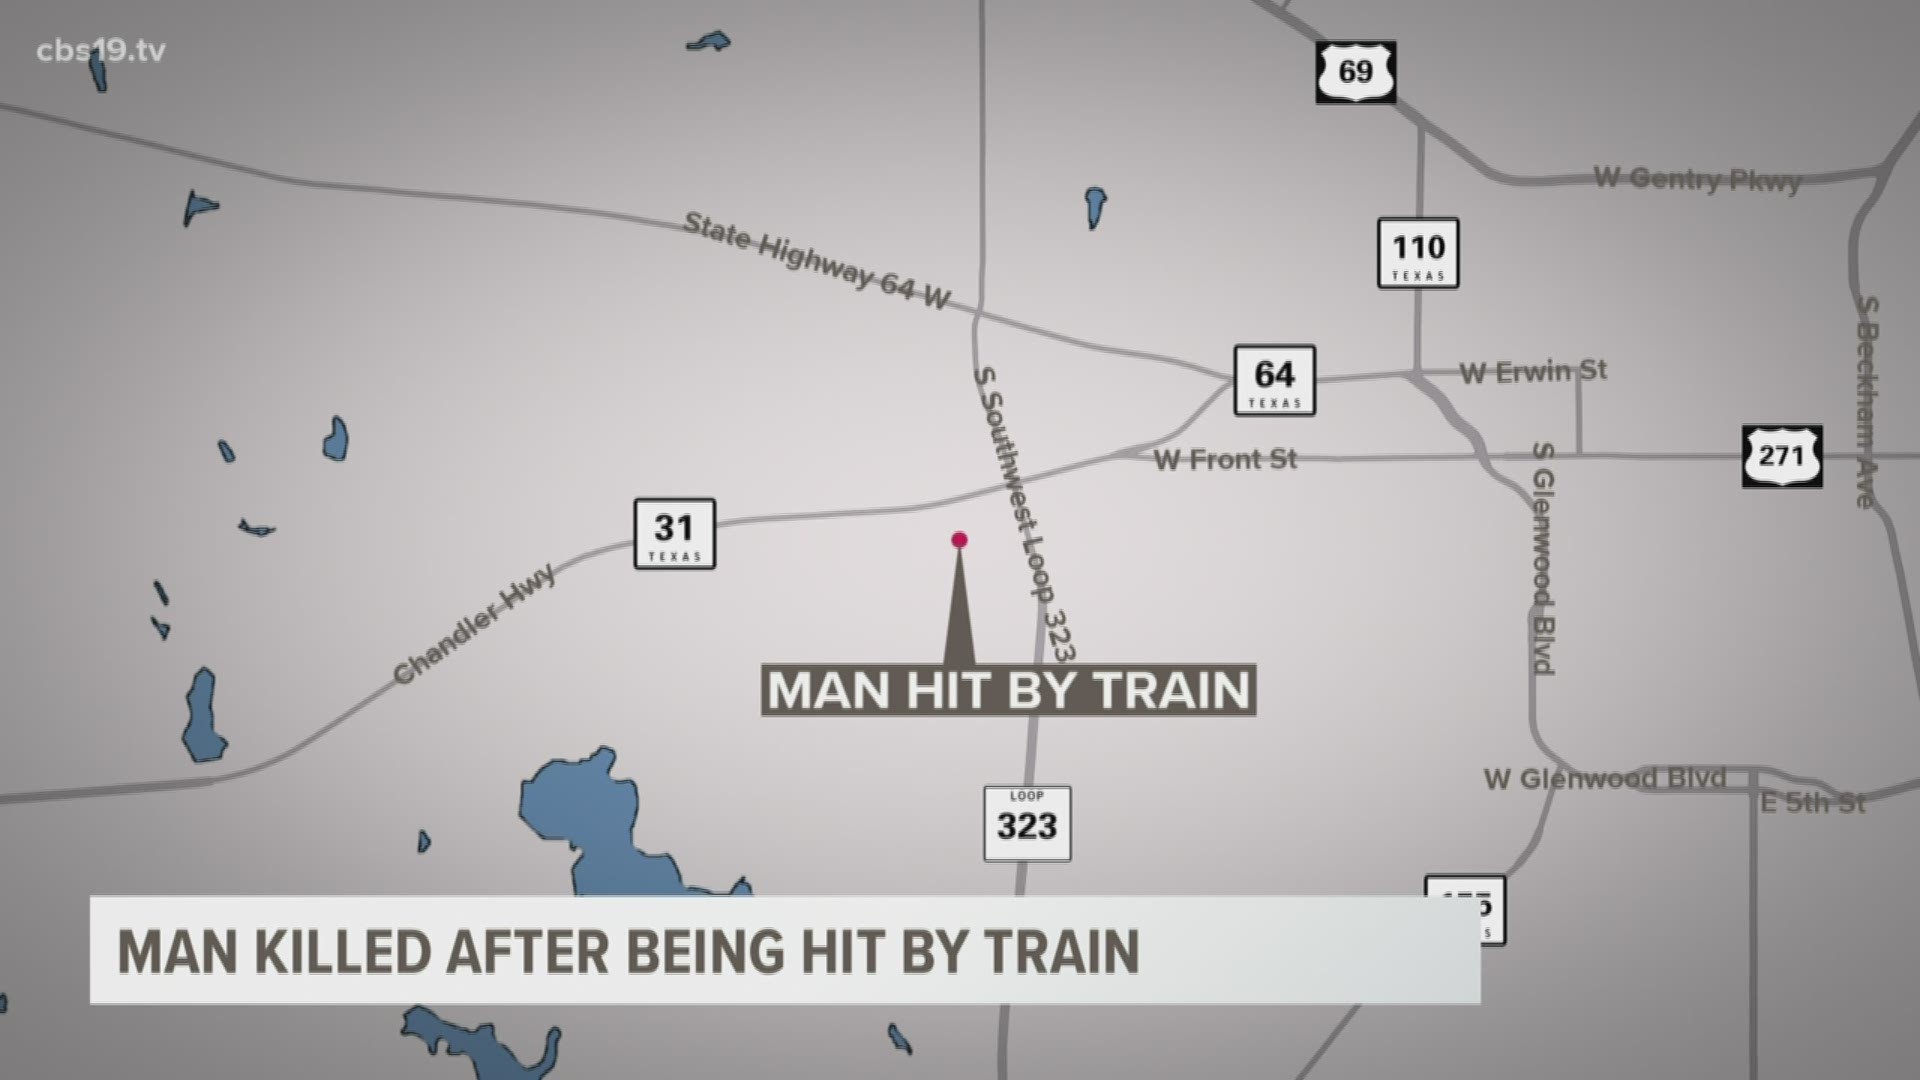 Police say the man was laying on the railroad tracks when he was hit.